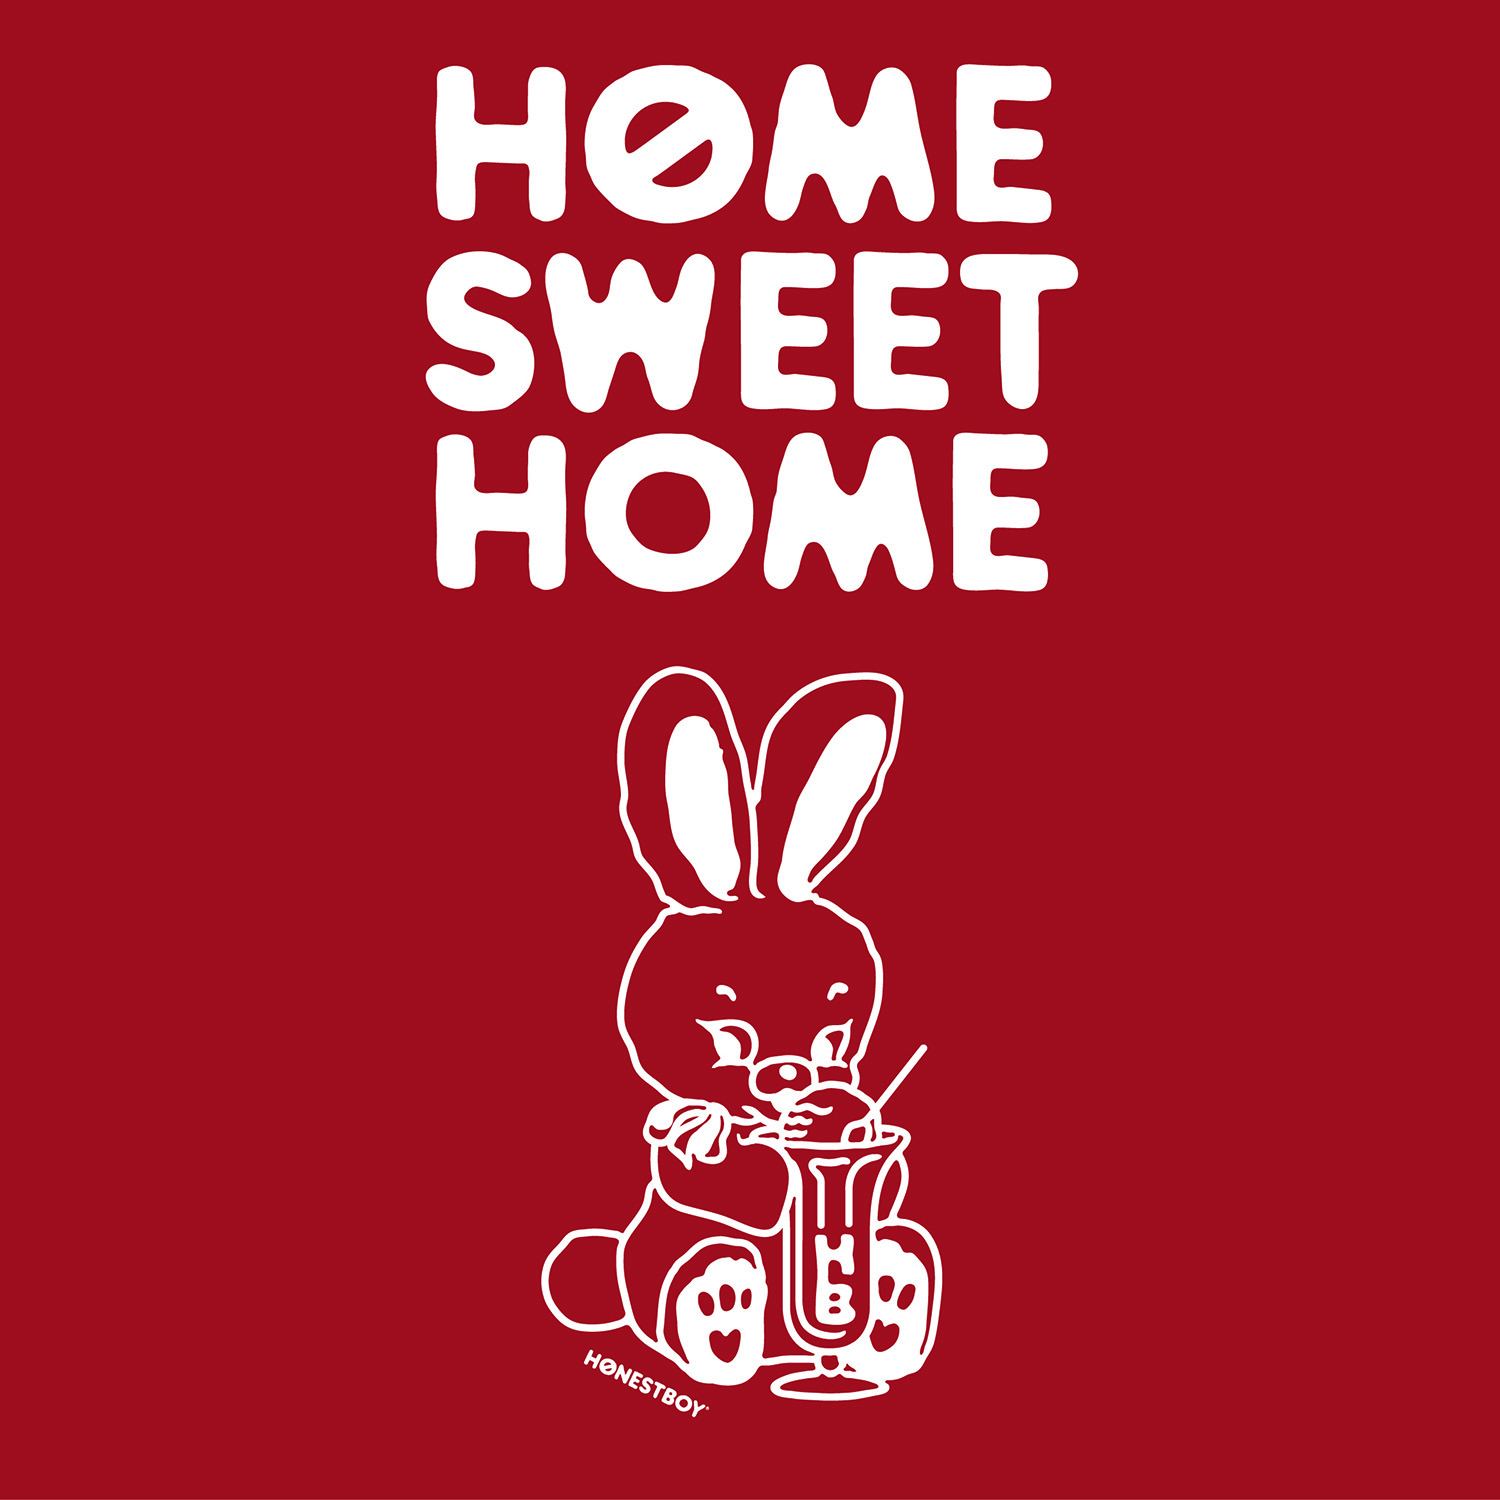 HONESTBOY® by STUDIO SEVENのホームコレクション『HOME SWEET HOME』